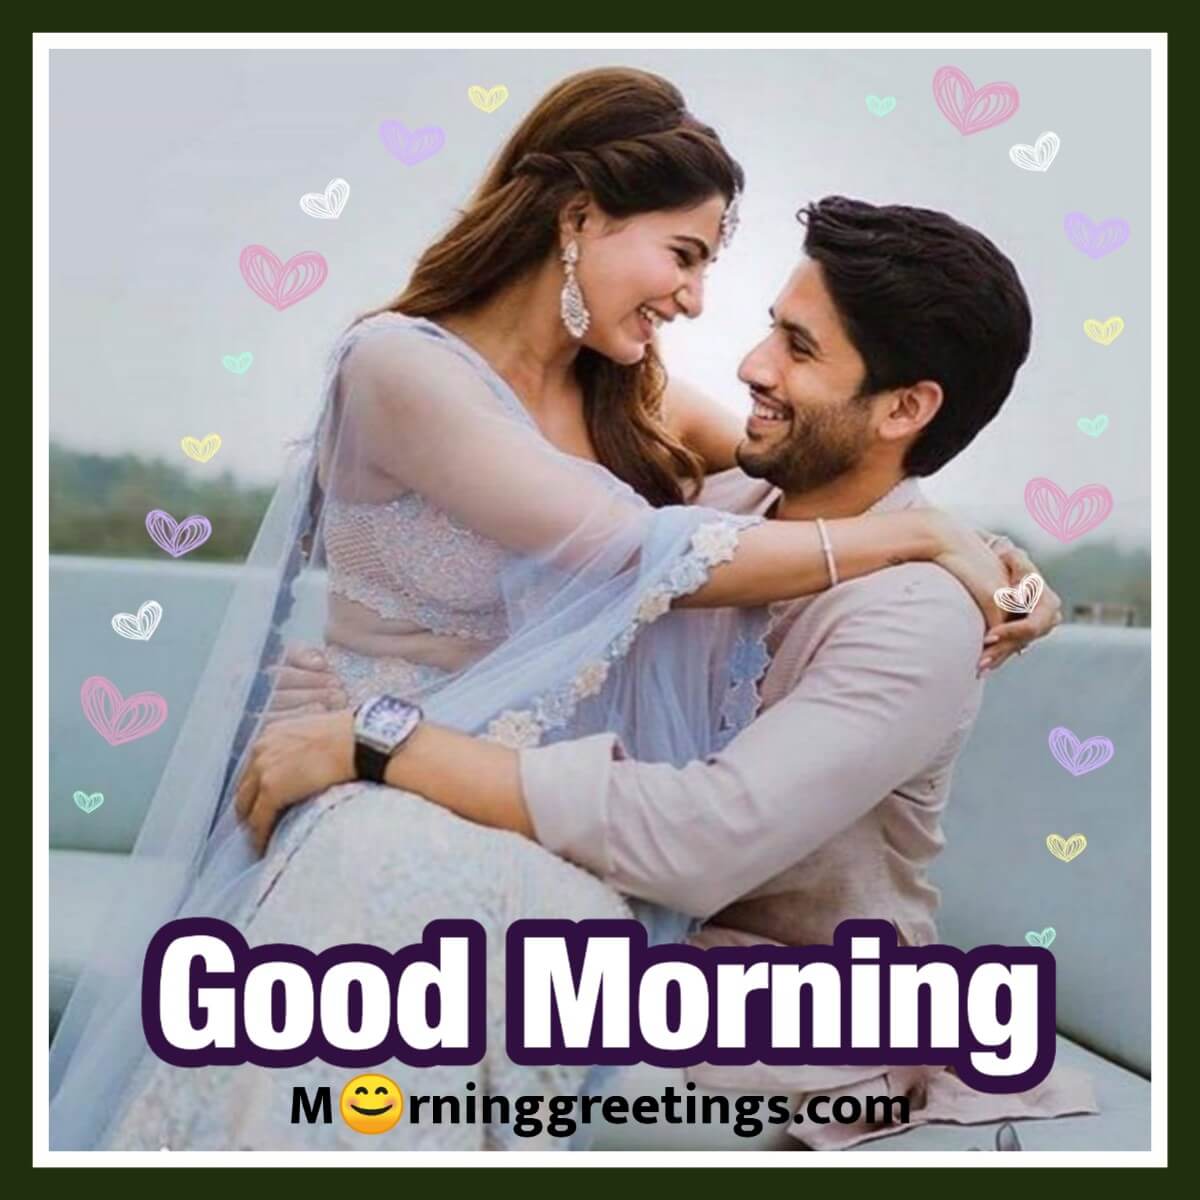 20 Good Morning Hug Quotes And Messages Cards Morning Greetings